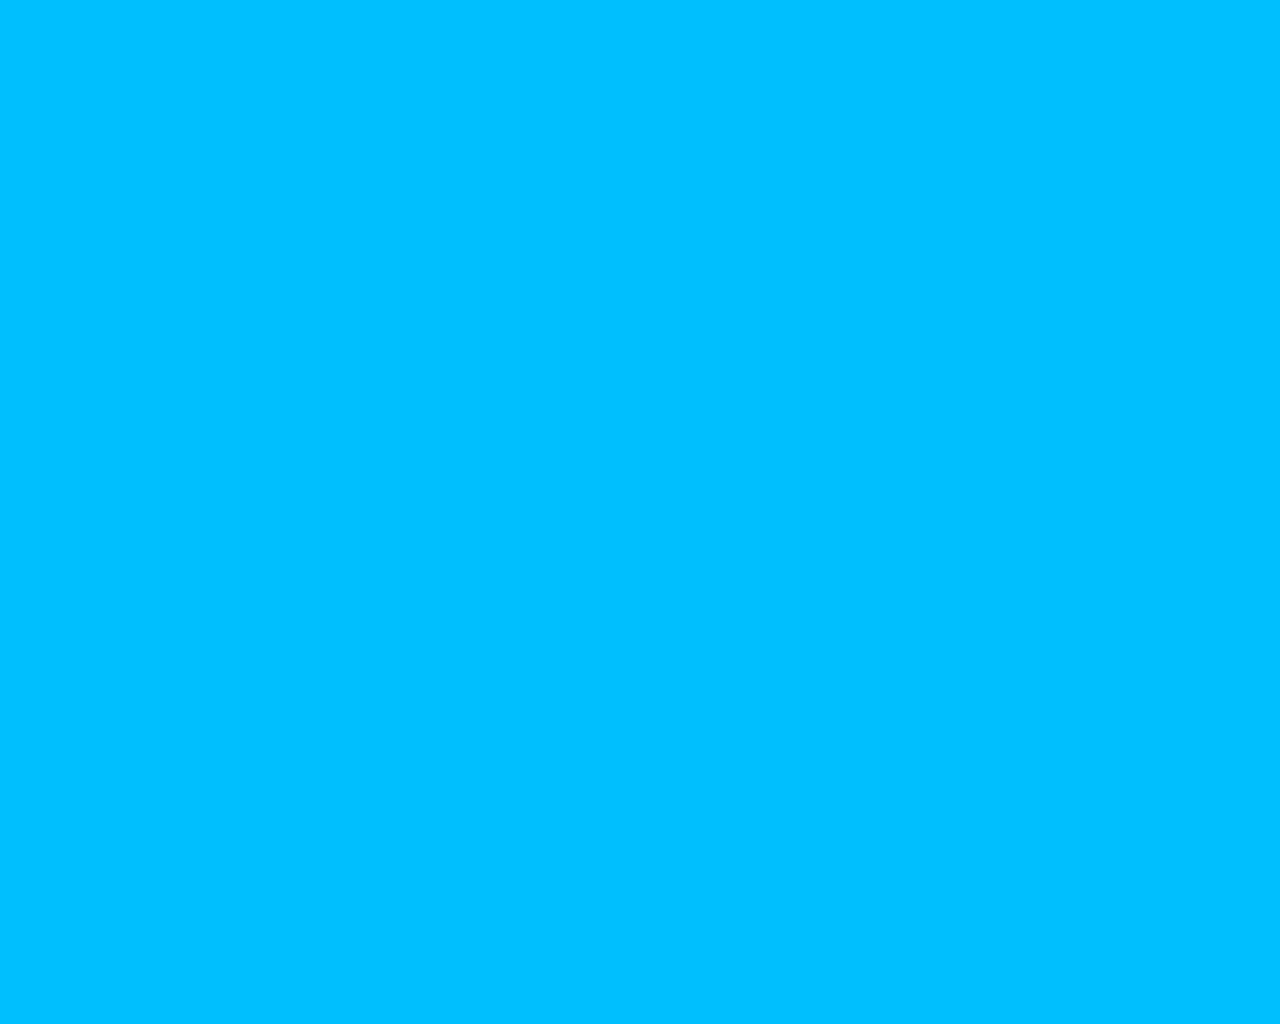 Free 1280x1024 resolution Deep Sky Blue solid color background view